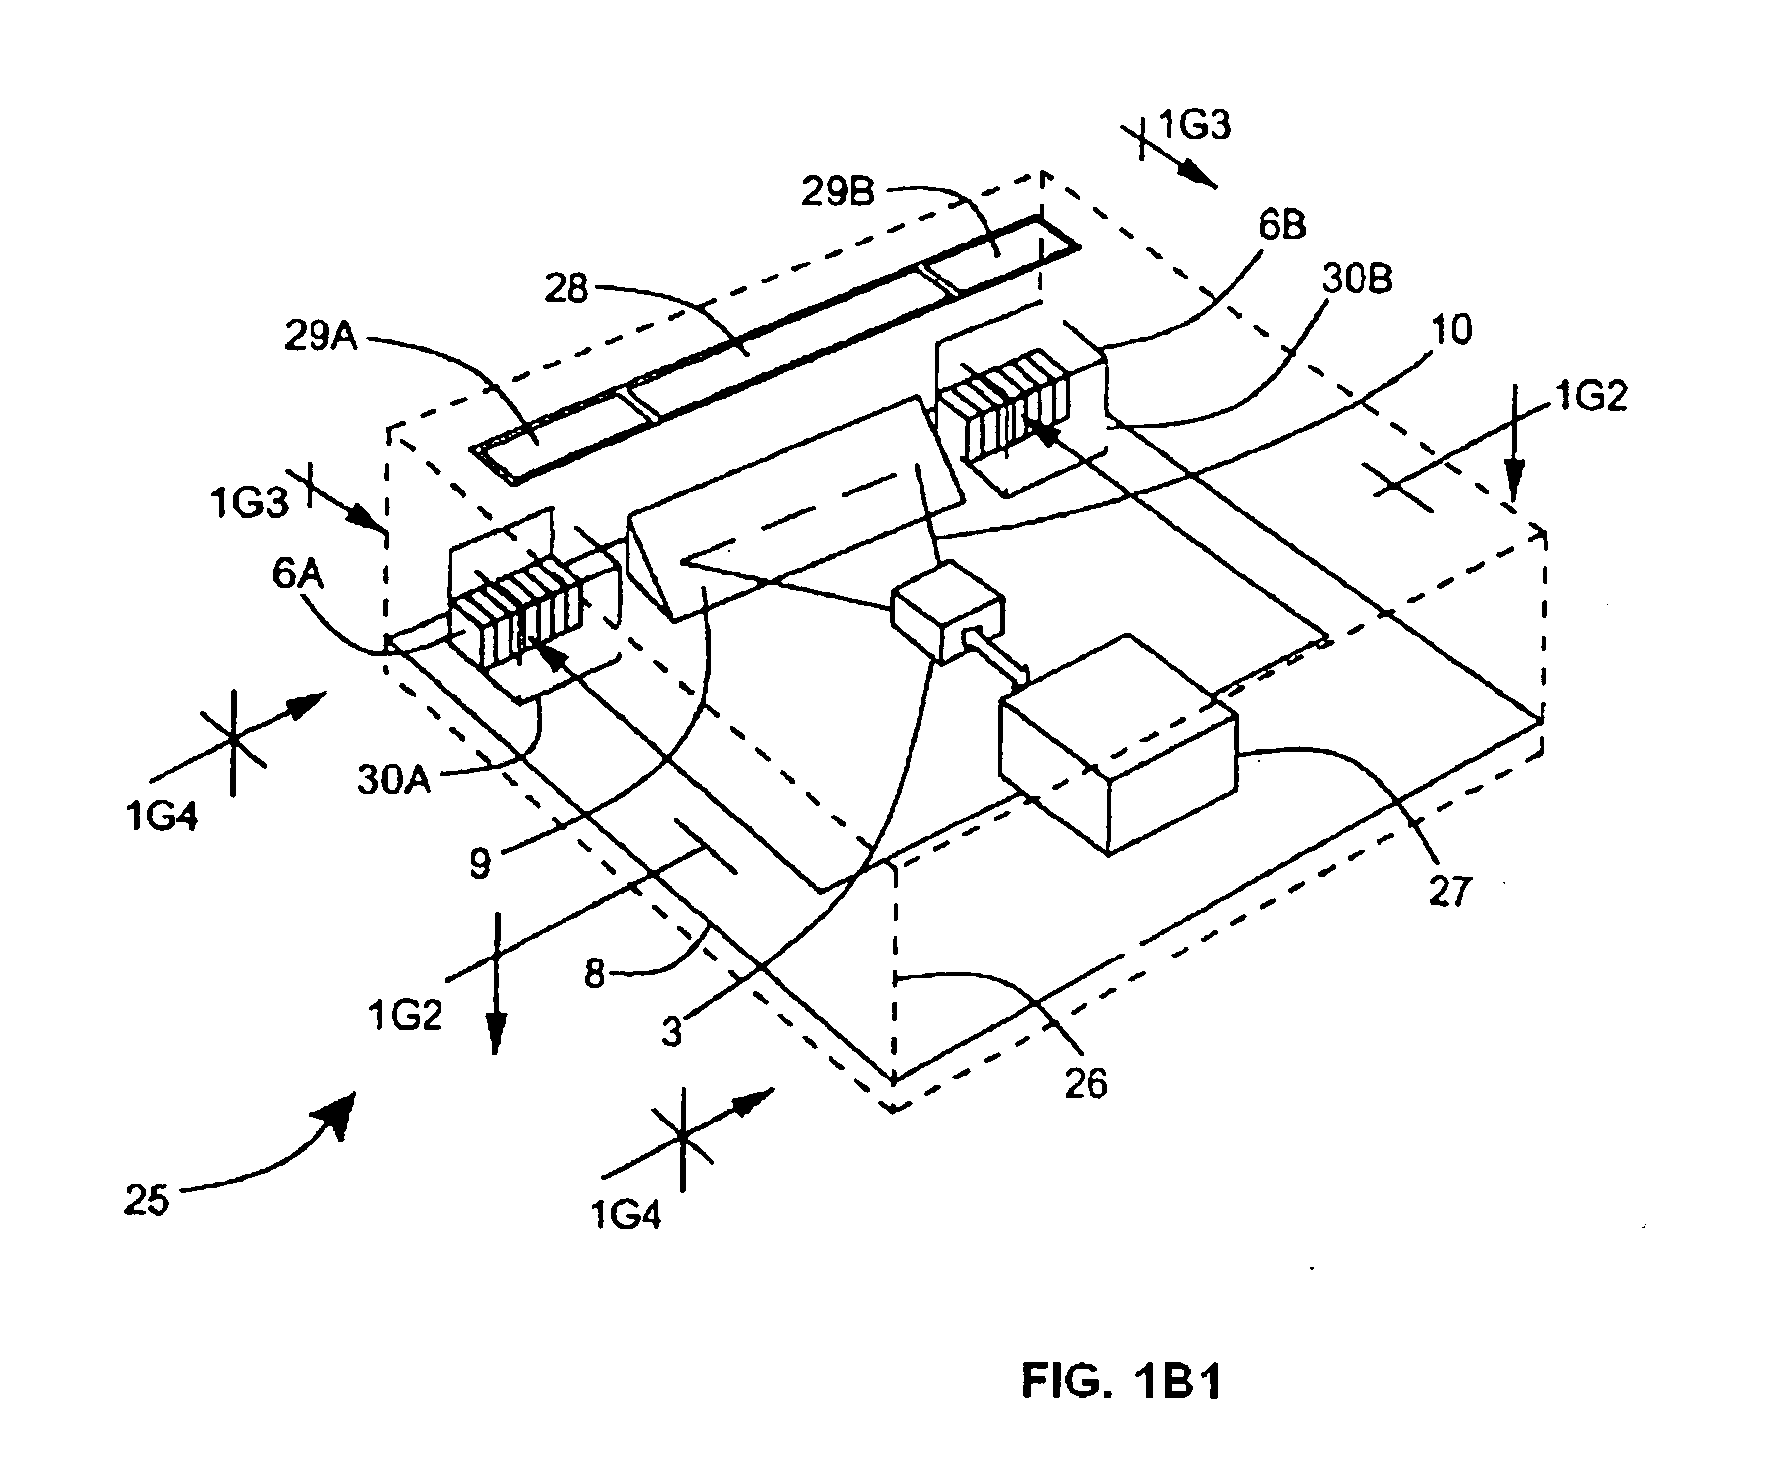 Method of and system for profile equalization employing visible laser diode (VLD) displacement